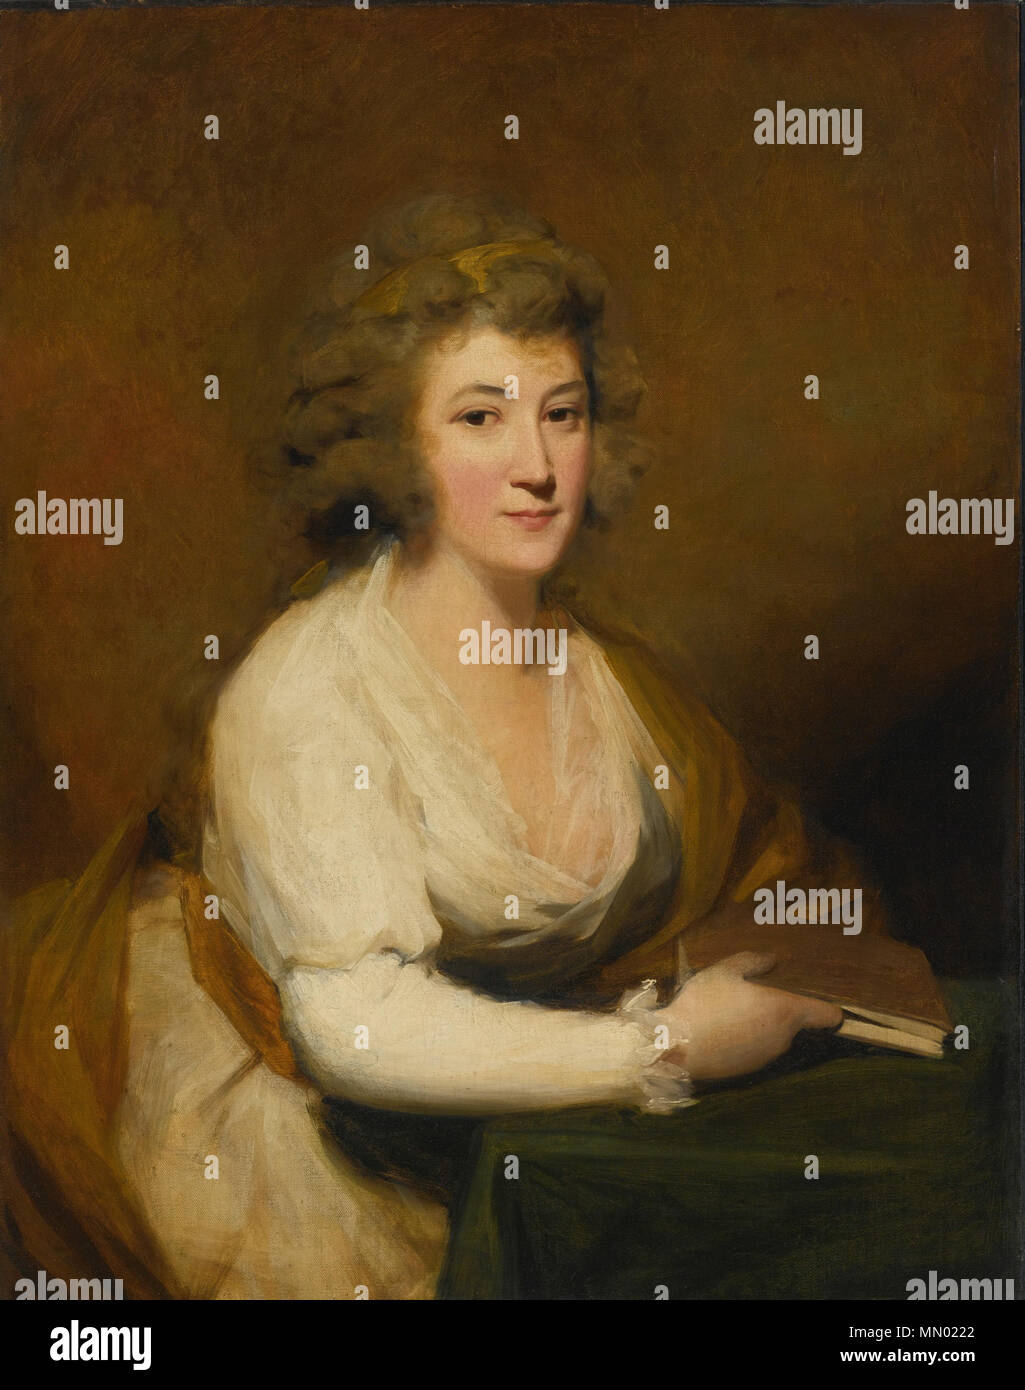 . Portrait of Lady Nasmyth, in a white dress and brown shawl, seated at a table, holding a book oil on canvas 91.4 by 71.8 cm. Eleanor Murrary (d. 1807), was the second daughter of John Murray of Philiphaugh. She married Sir James Nasmyth of Posso in 1785.  . 18th century.   Henry Raeburn  (1756–1823)     Description British painter  Date of birth/death 4 March 1756 8 July 1823  Location of birth/death Stockbridge, Edinburgh Edinburgh  Work location Edinburgh, London  Authority control  : Q561916 VIAF:?24874387 ISNI:?0000 0000 6634 371X ULAN:?500032325 LCCN:?n83013586 NLA:?36306862 WorldCat He Stock Photo